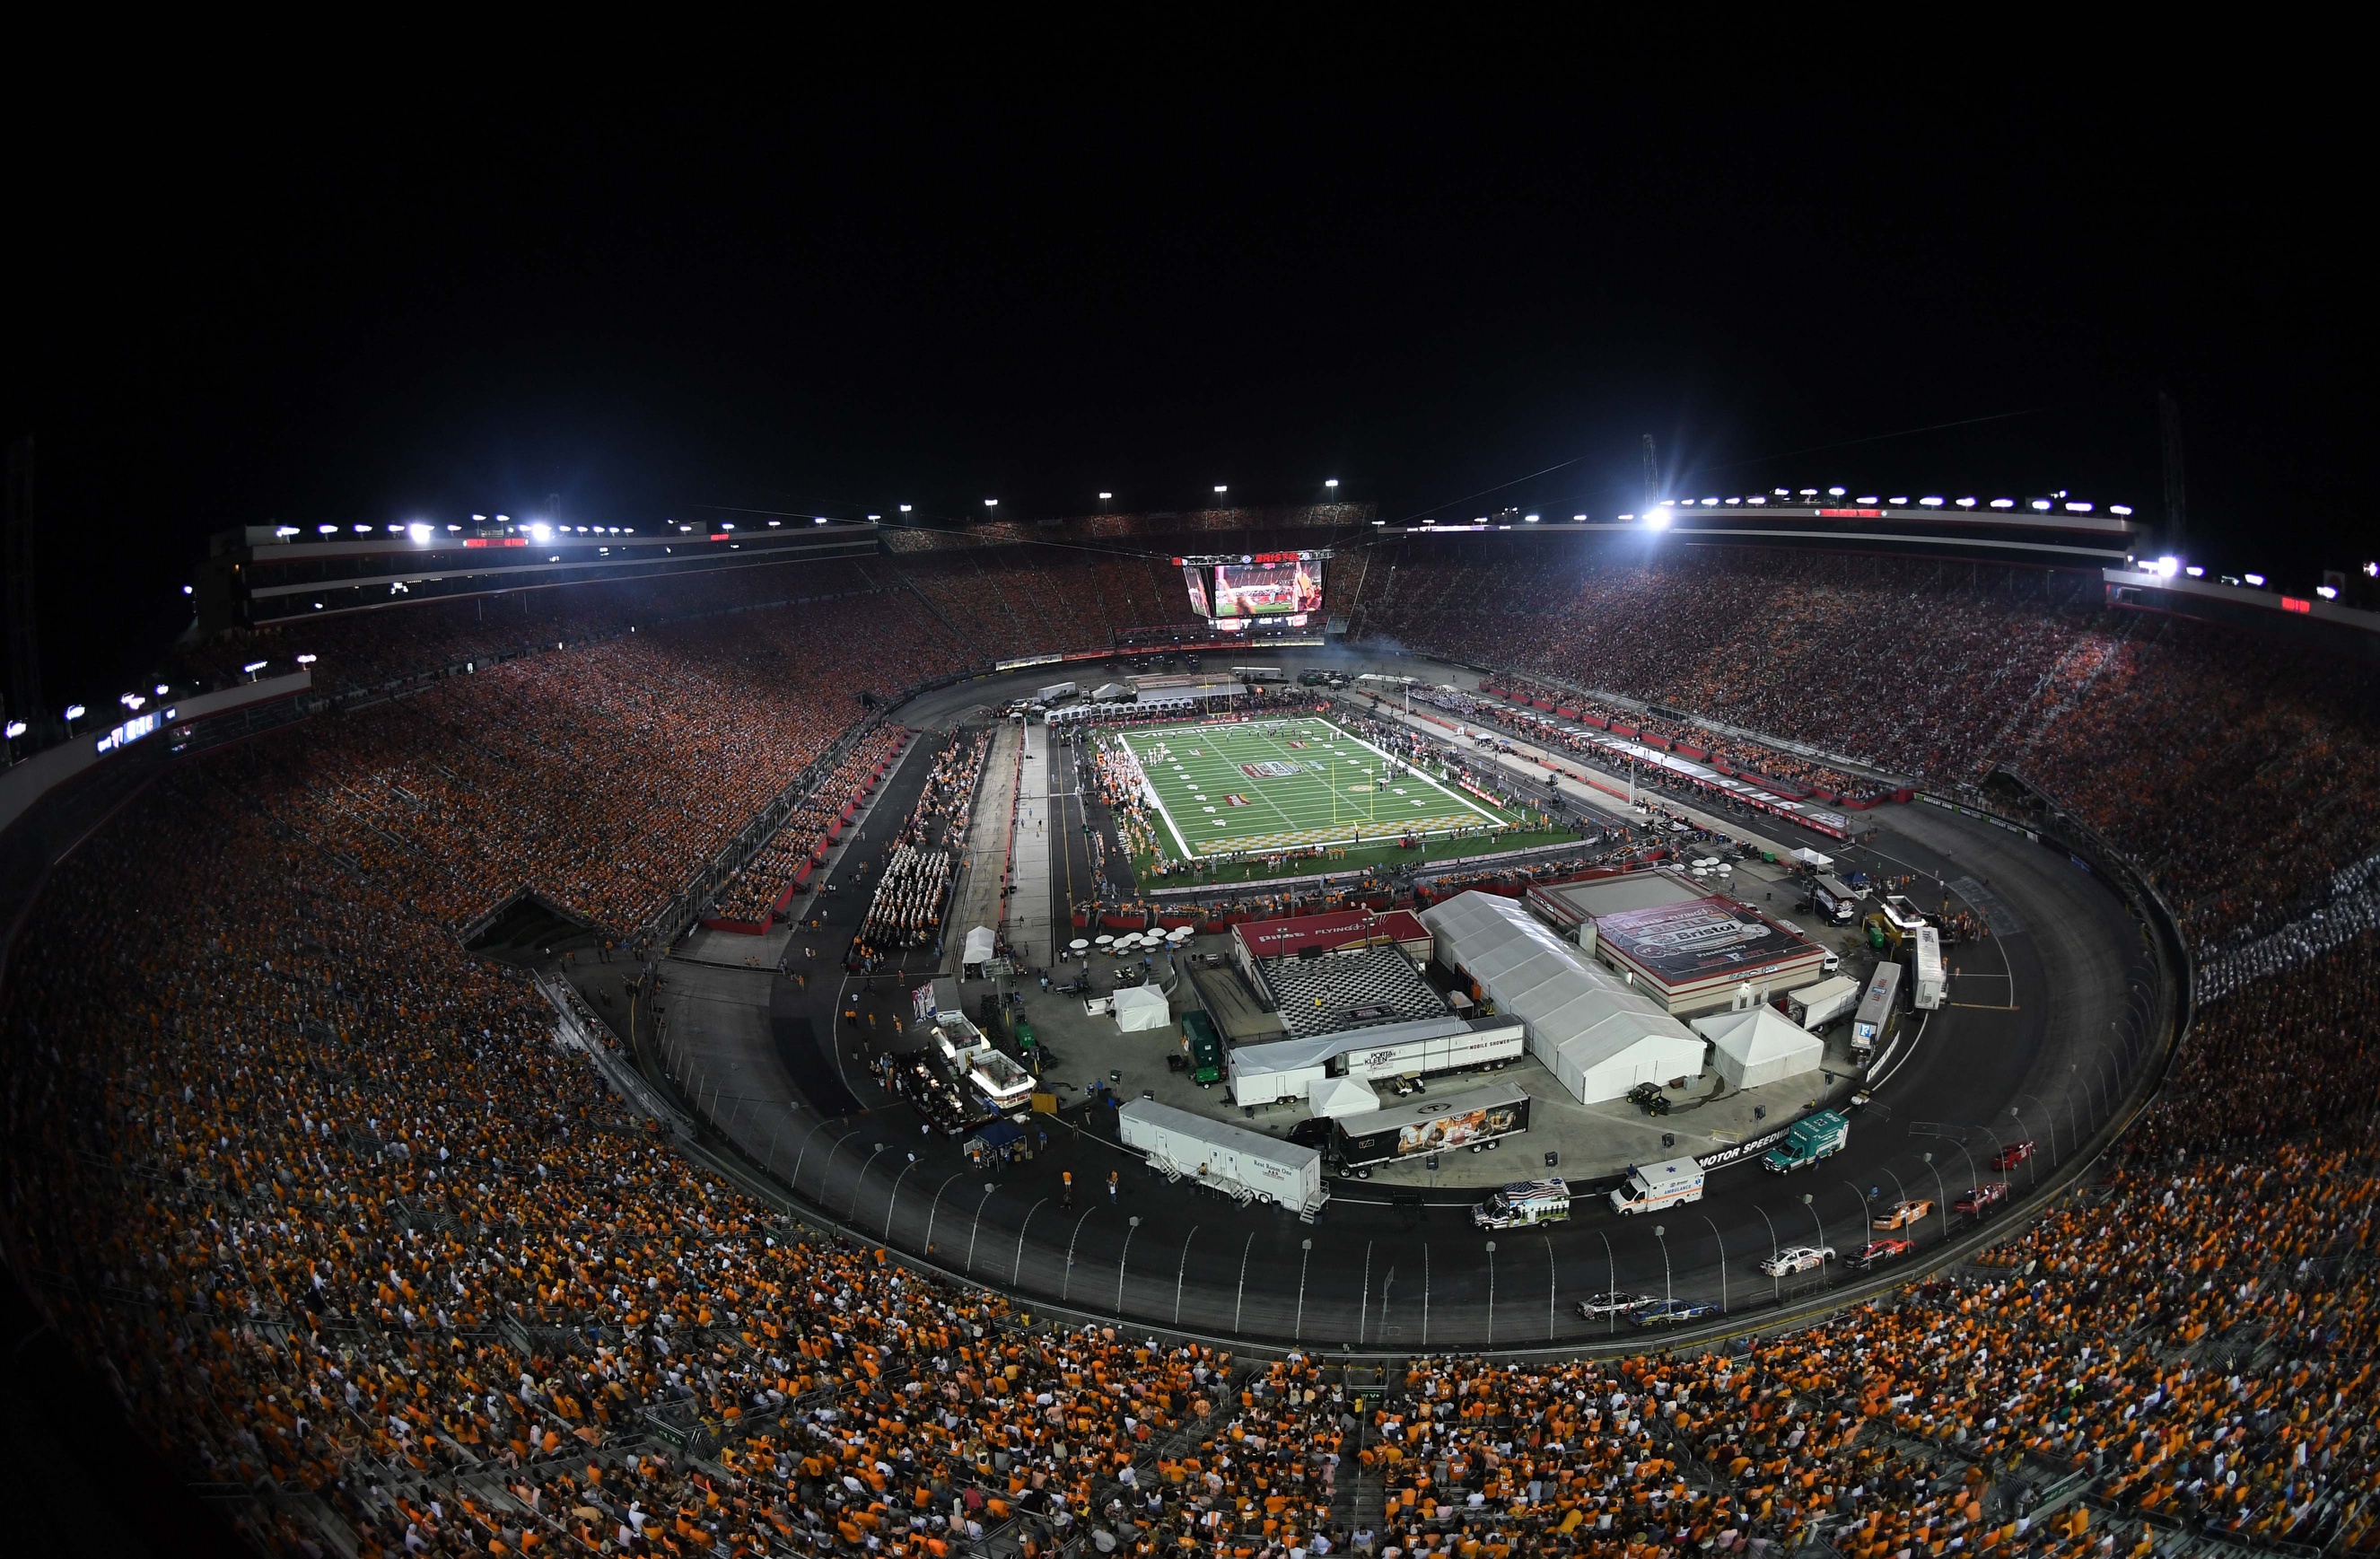 Sep 10, 2016; Bristol, TN, USA; General view of Bristol Motor Speedway during the first quarter of the Battle at Bristol college football game between the Virginia Tech Hokies and Tennessee Volunteers. Mandatory Credit: Christopher Hanewinckel-USA TODAY Sports